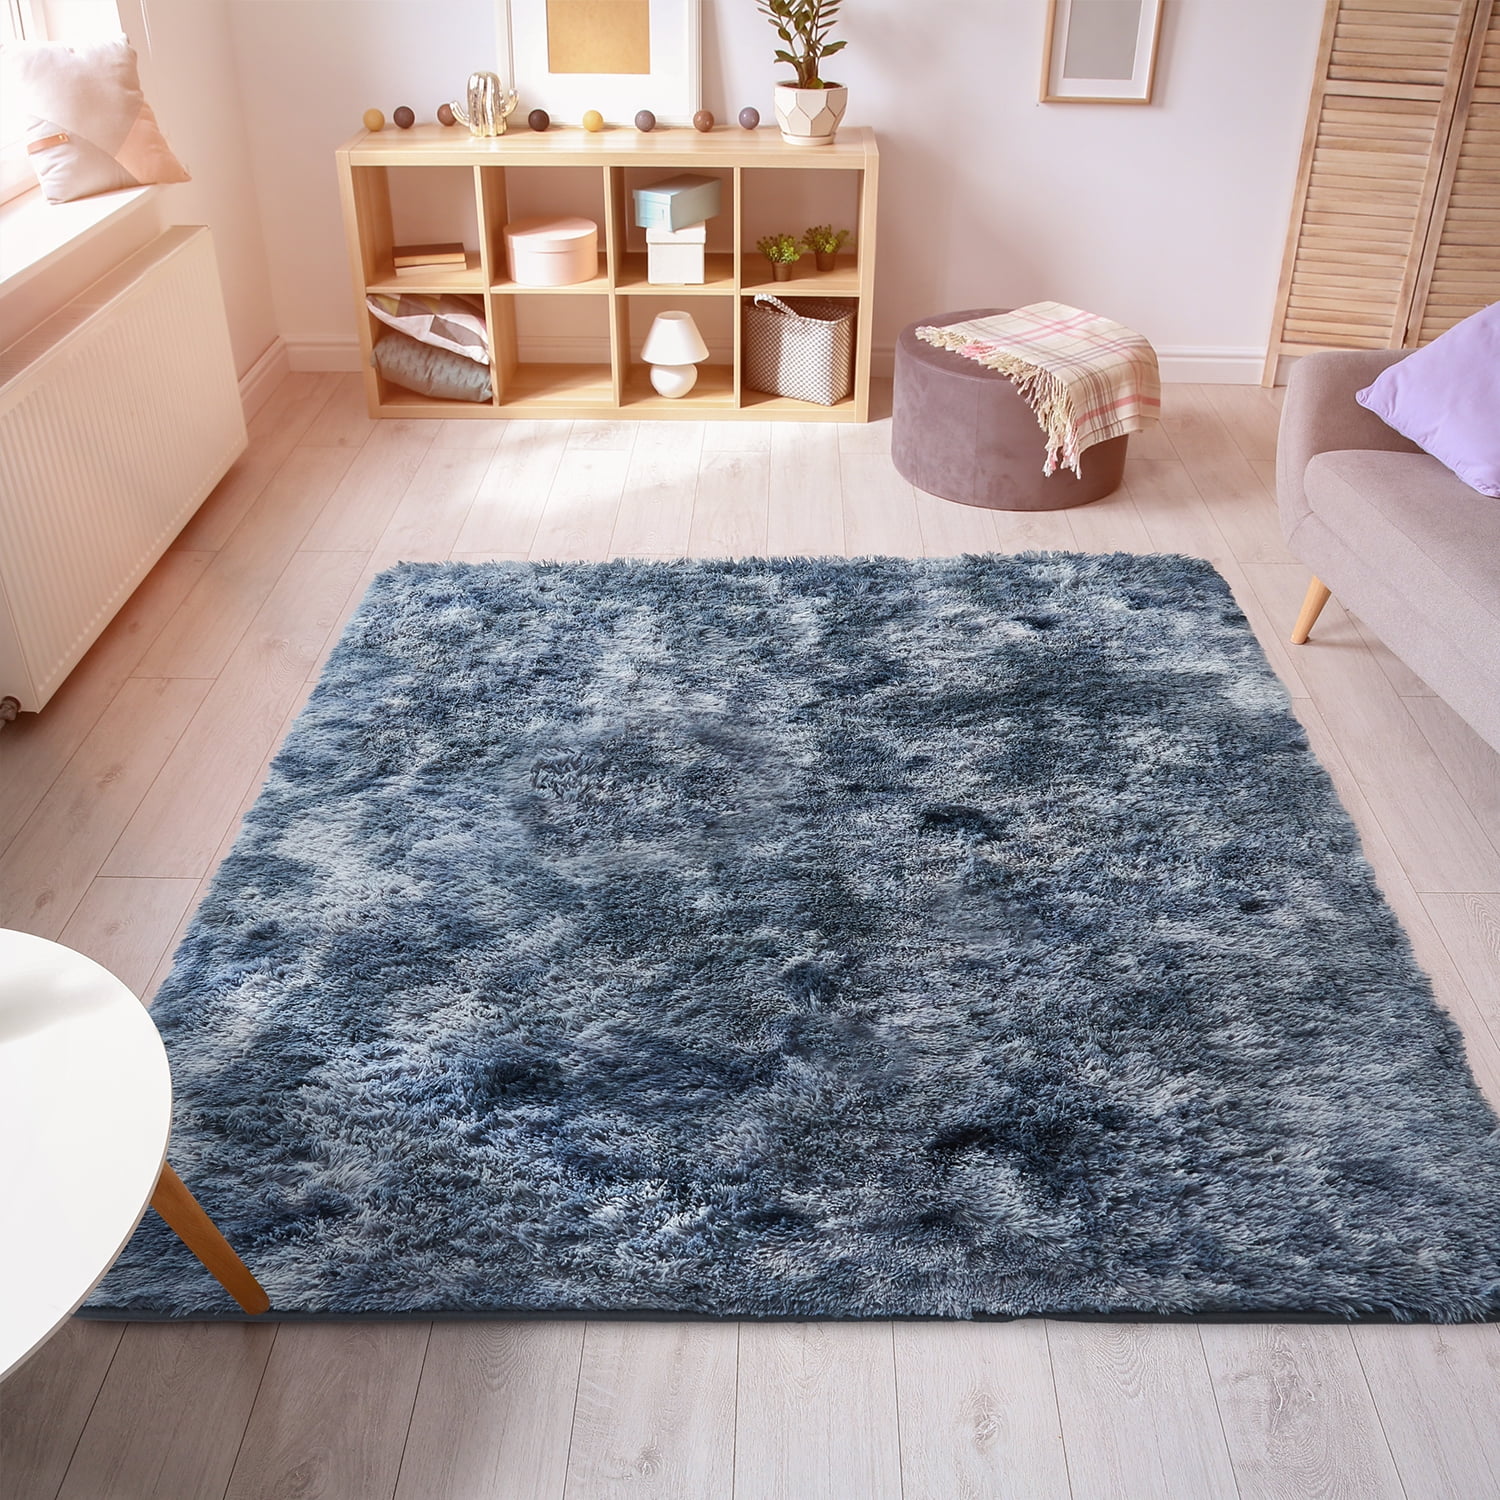 Ophanie 6x9 Area Rugs for Living Room, Large Big Grey Fluffy Shag Fuzzy  Plush Soft Carpets, Floor Shaggy Rug for Bedroom, Gray Carpet for Kids Boys